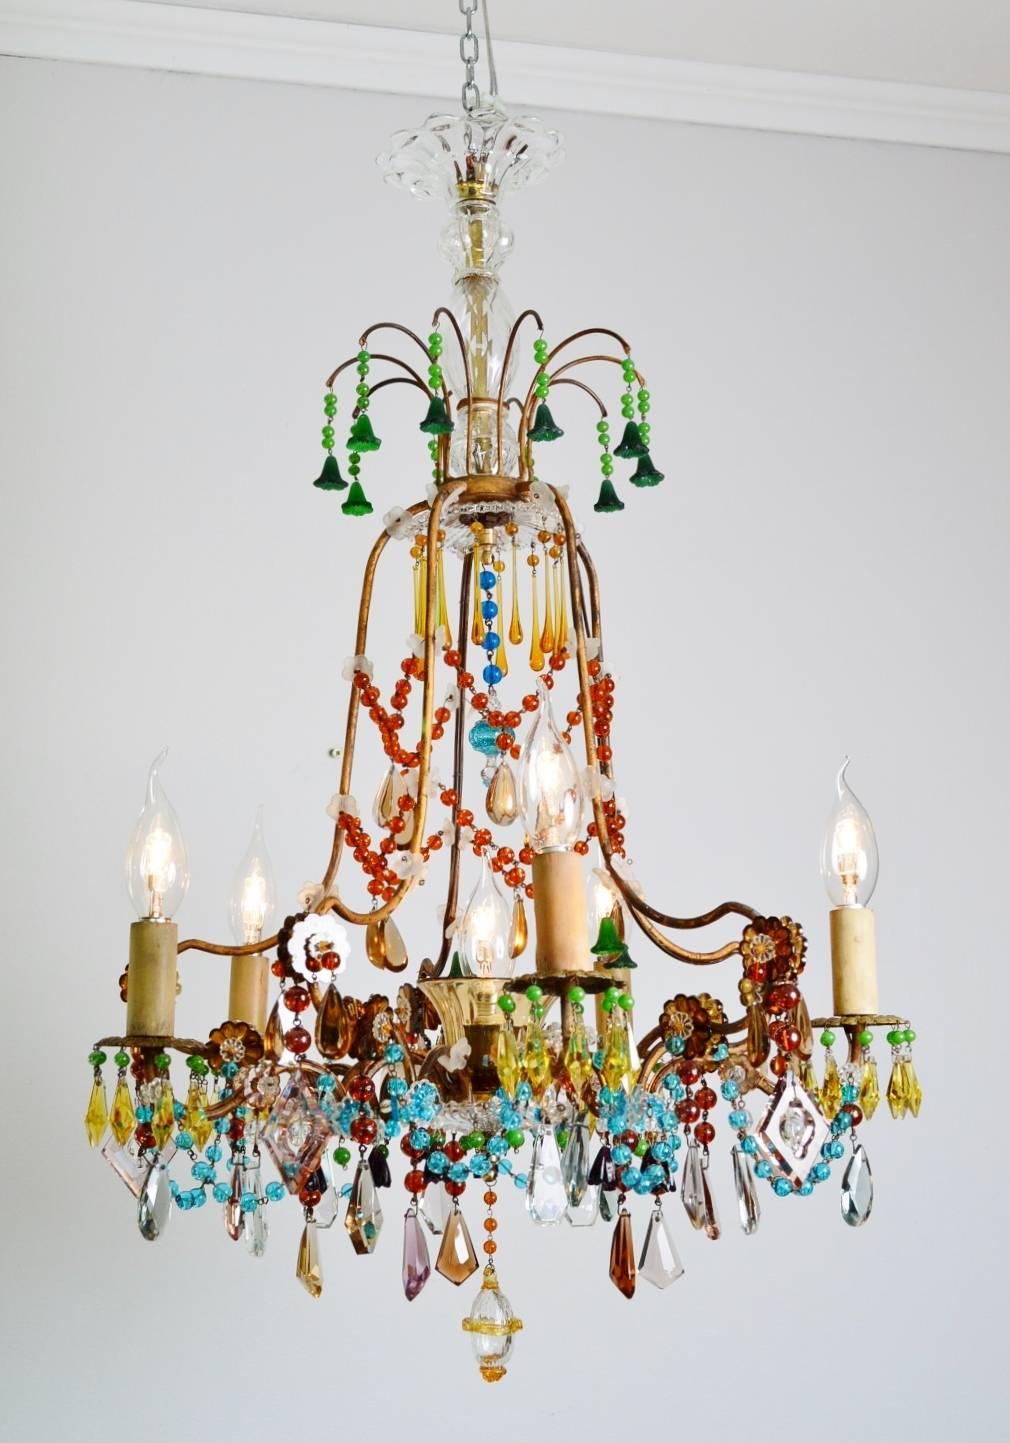 Beautiful and unique multicolored crystal glass chandelier, very rare and one-of-a-kind.
This chandelier has a typical French gilt "cage form", with five arms for five small candelabra bulbs as well as another small bulb in the middle of